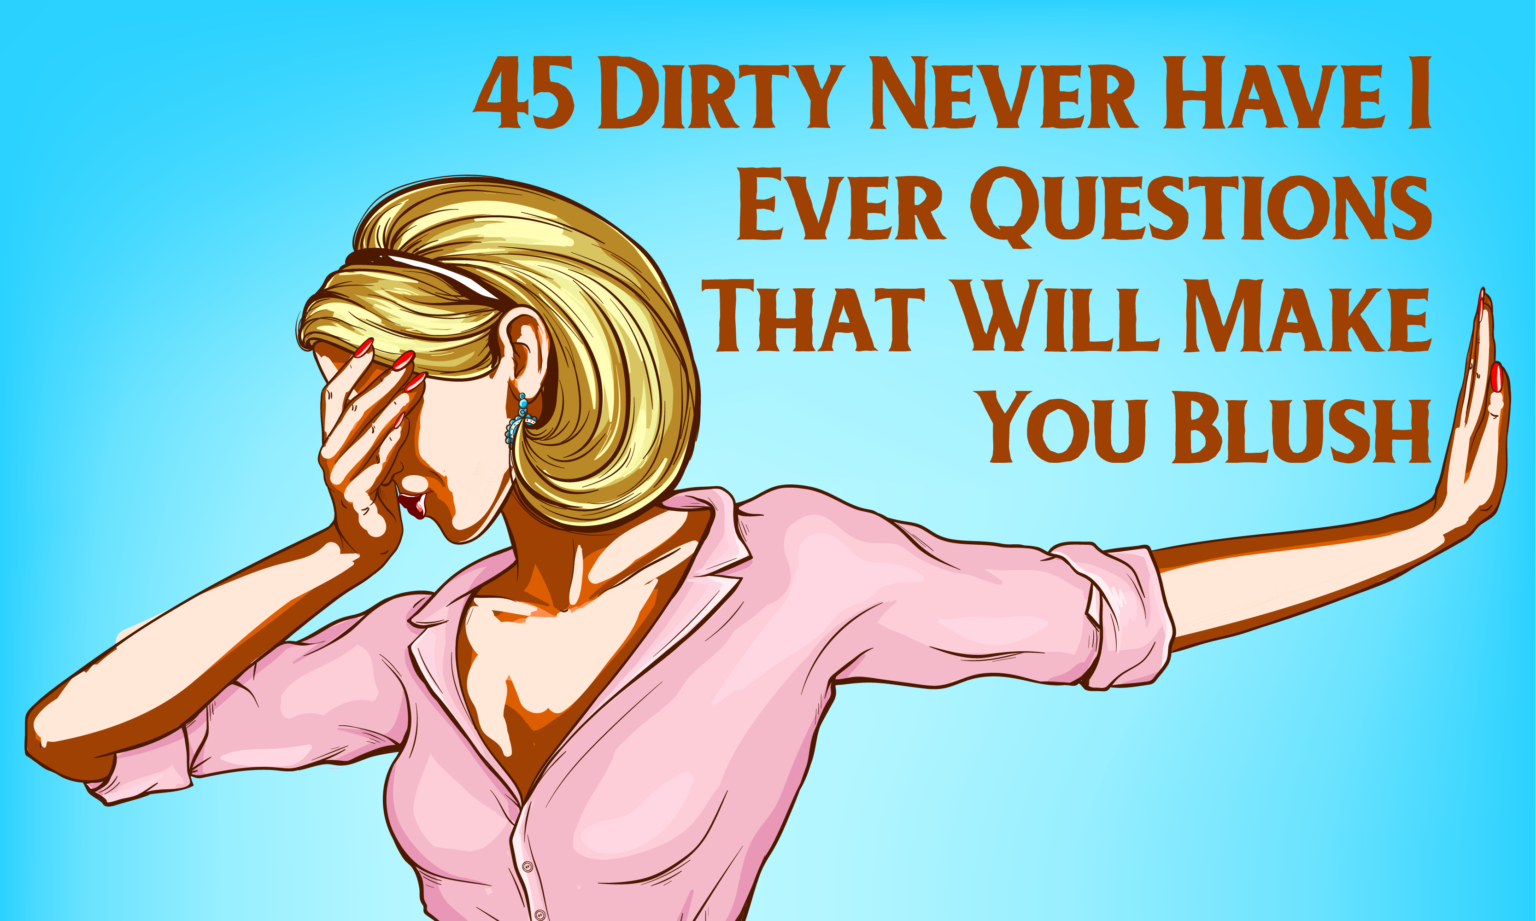 never have i ever dirty questions generator